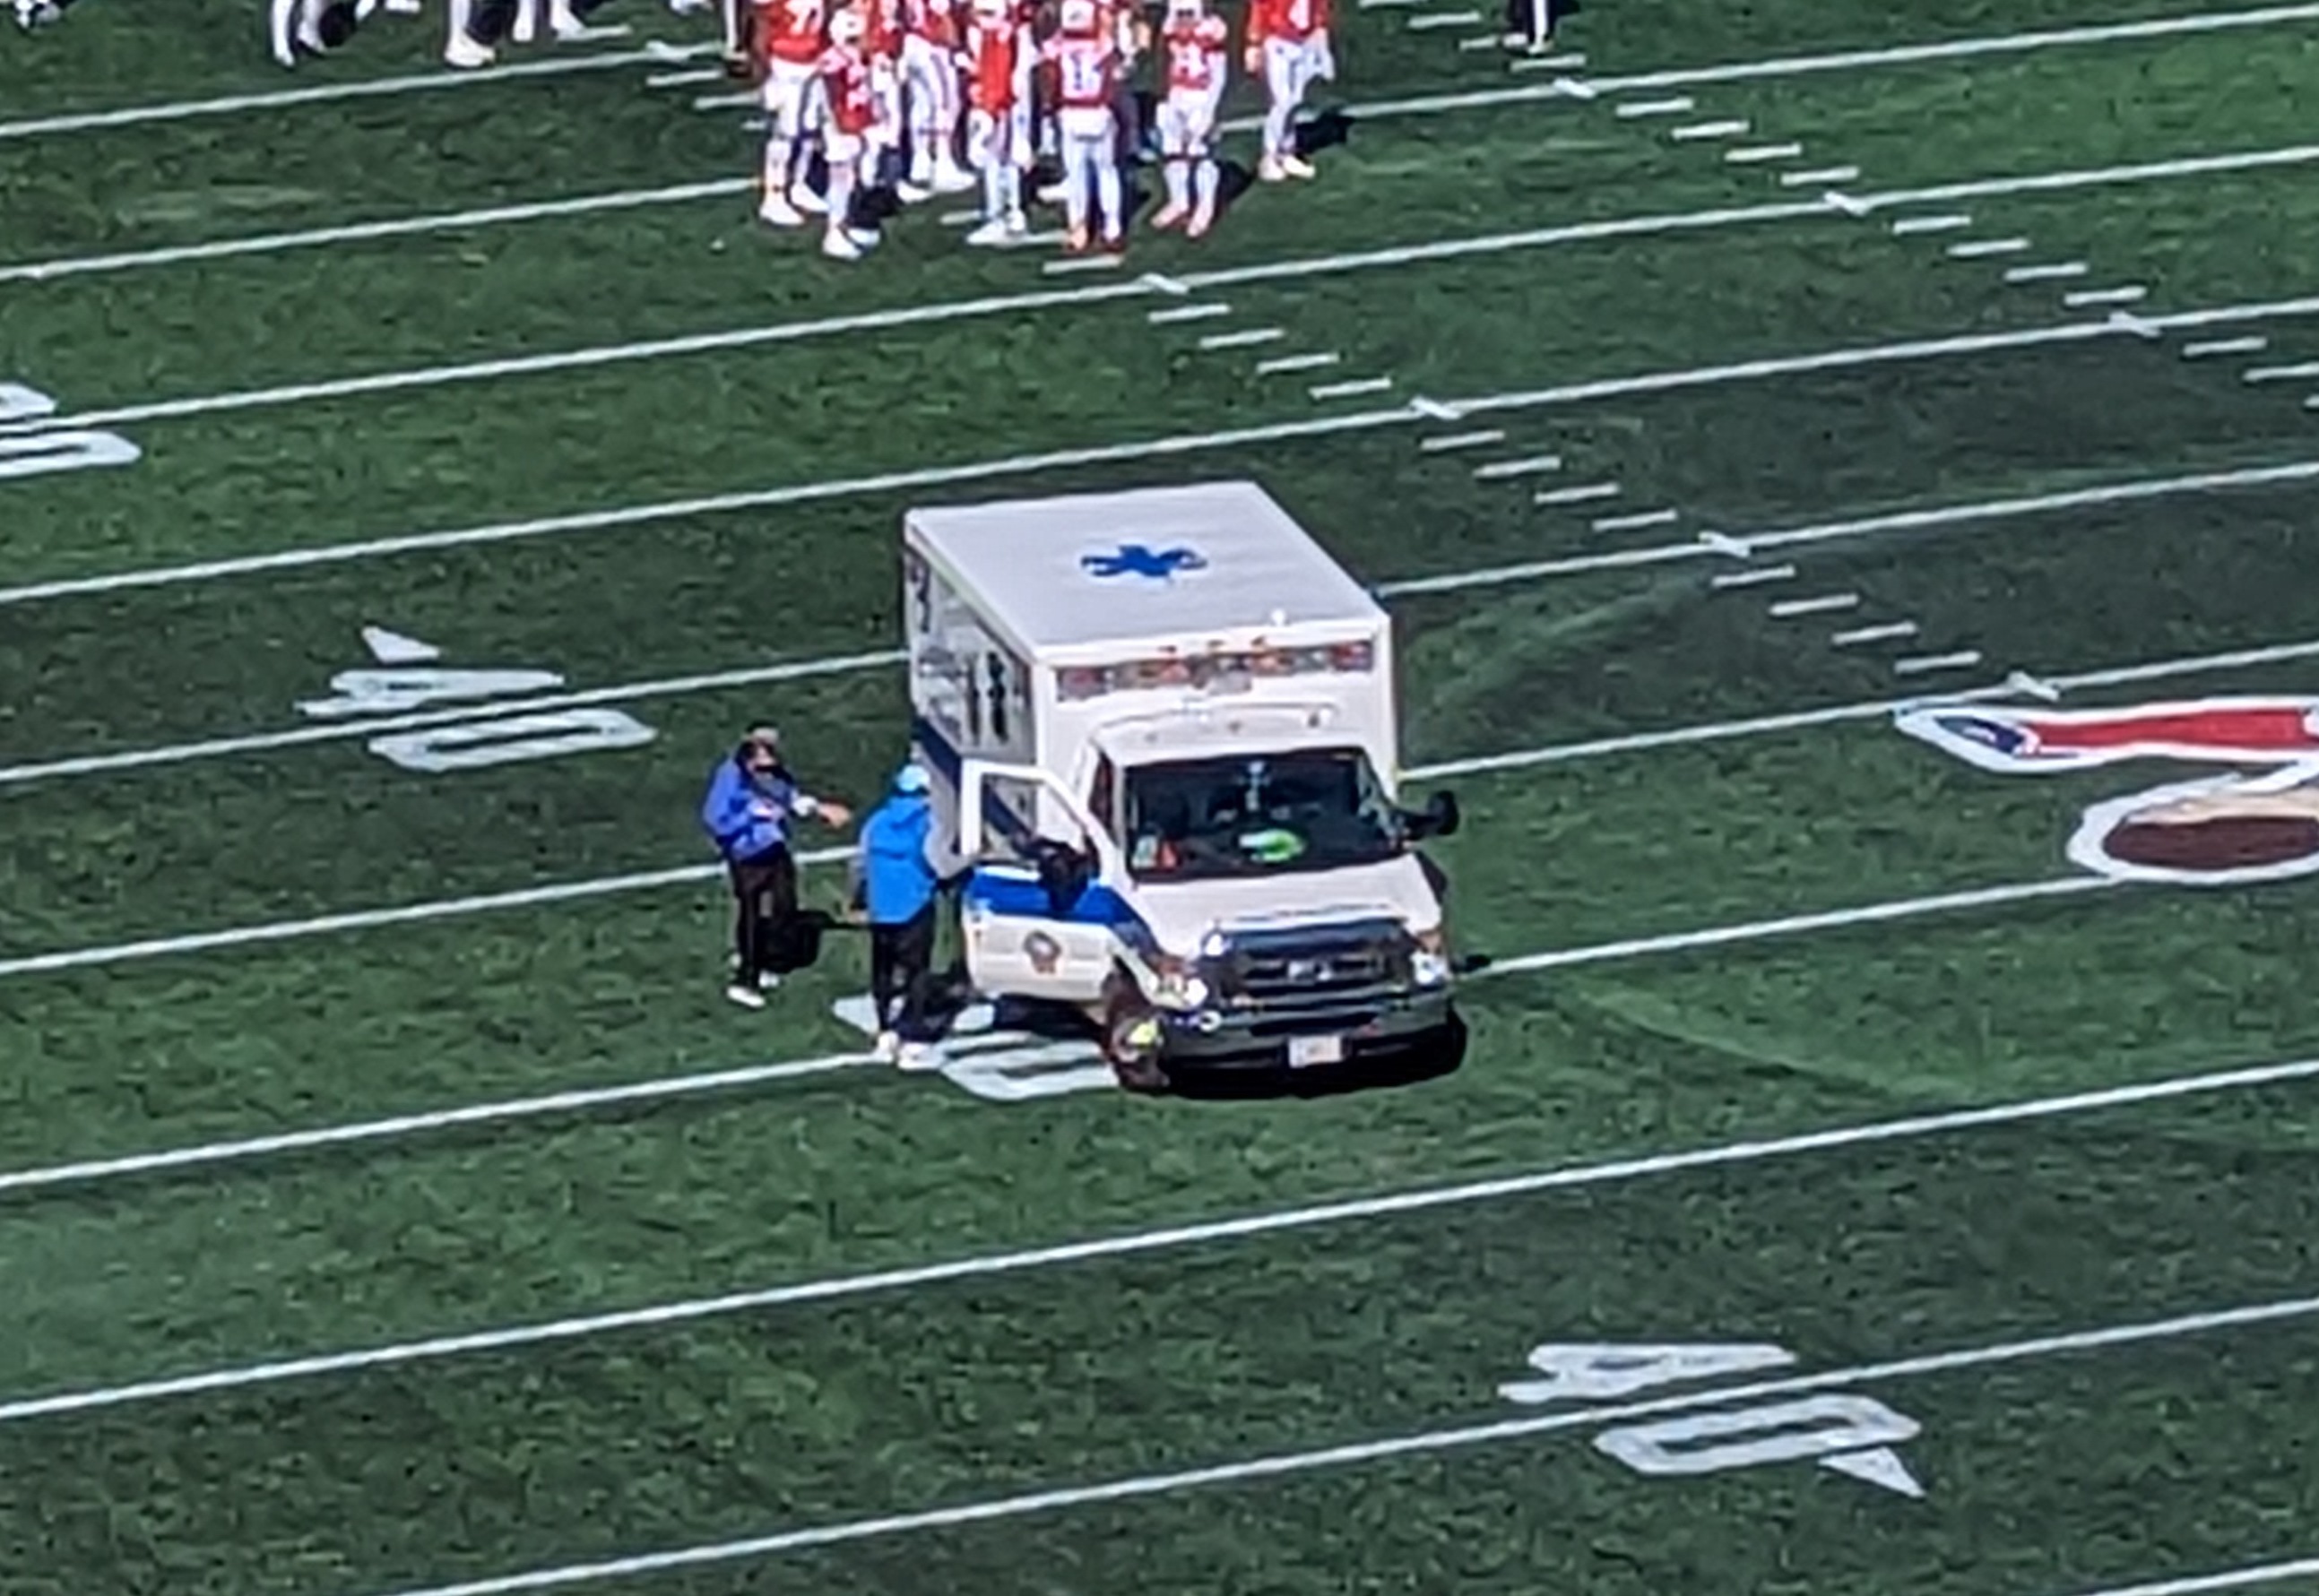 Saivion Smith Taken Off In An Ambulance After Neck Injury – OutKick